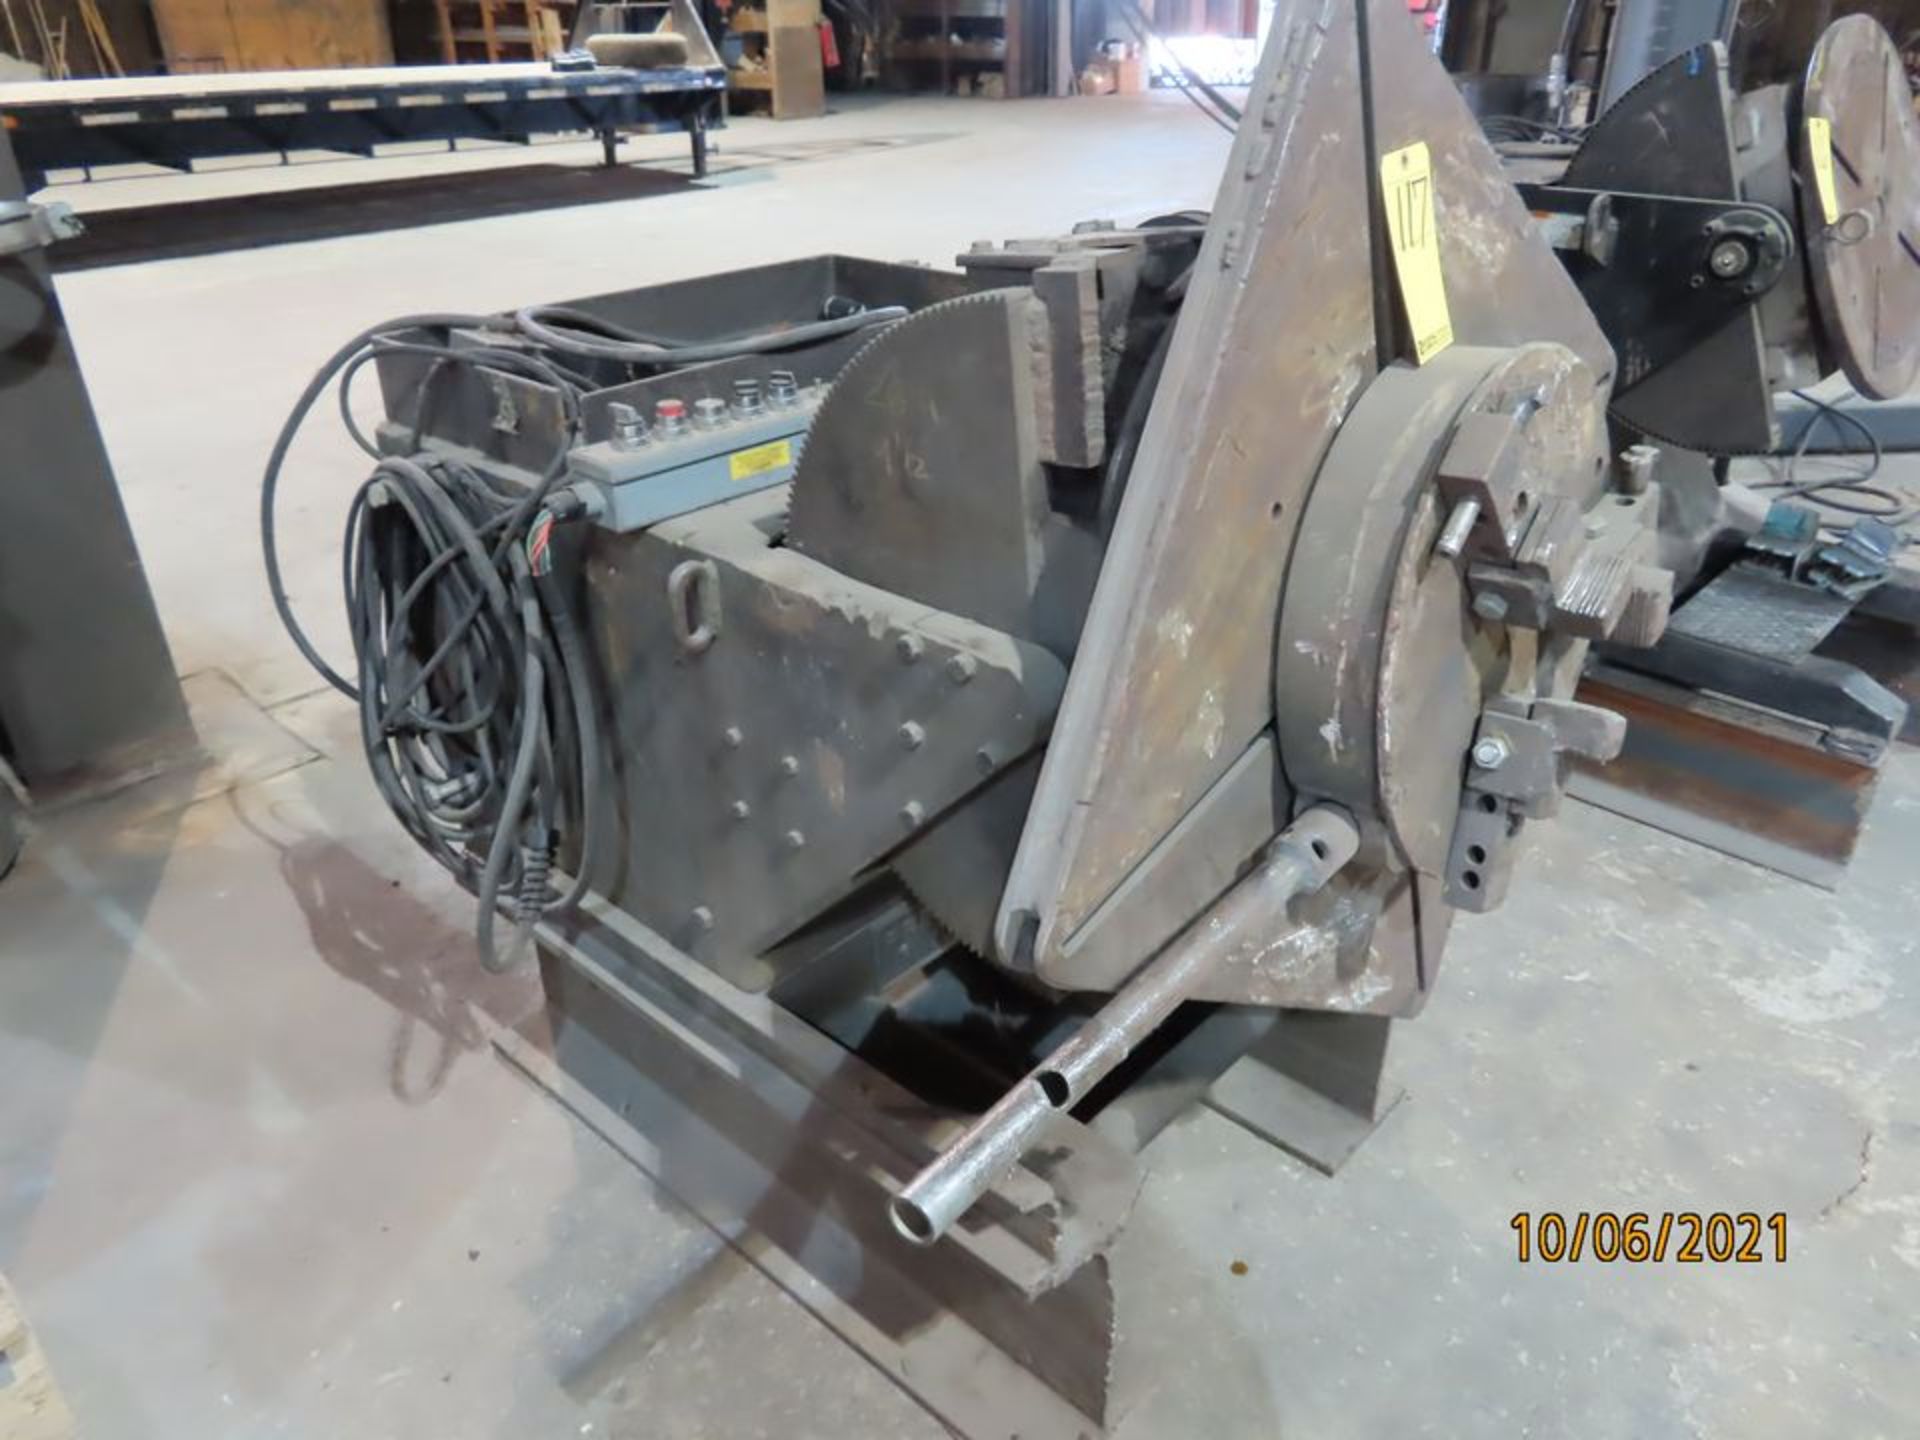 PRESTON EASTIN WELDING POSITIONER, M# PA25HDS, S/N PA25HD50, APPROX. 2,500 LB. CAP., 18" 3-JAW CHUCK - Image 2 of 2